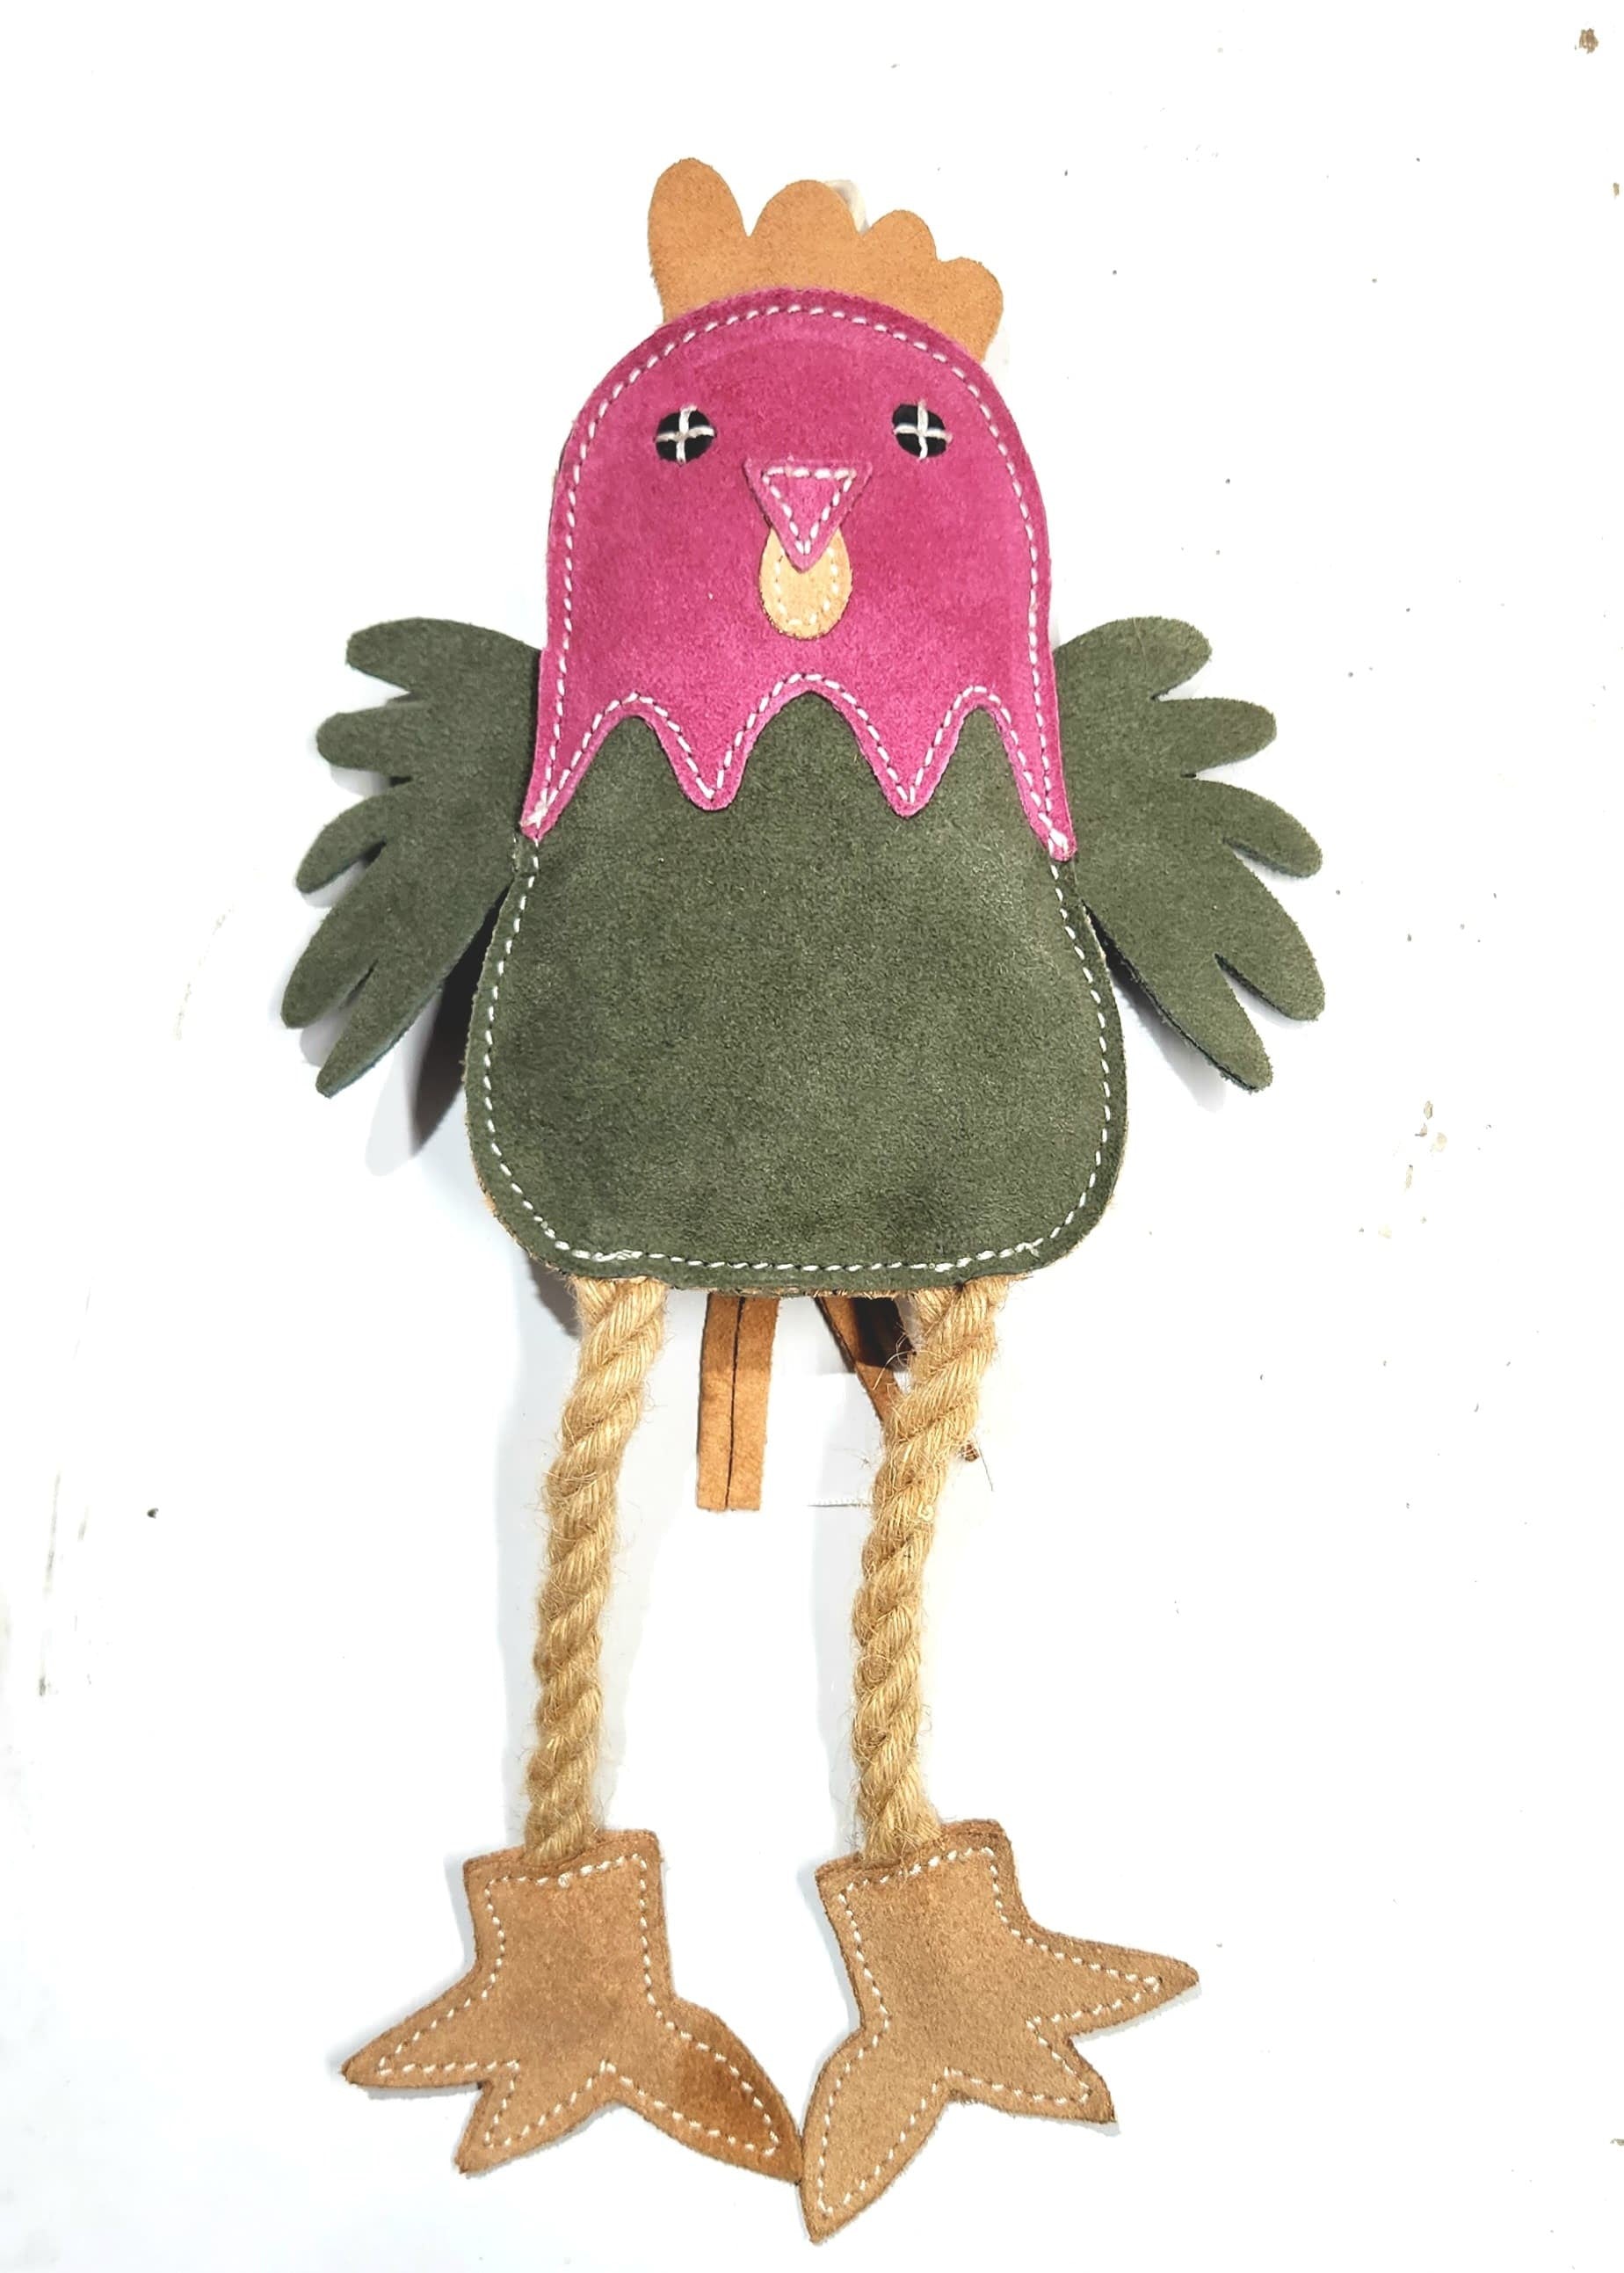 A colorful felt craft resembling Matilda the Chicken, featuring a pink head with eyes and a beak, a green body, brown buffalo suede wings and feet, and braided twine as legs, set against.